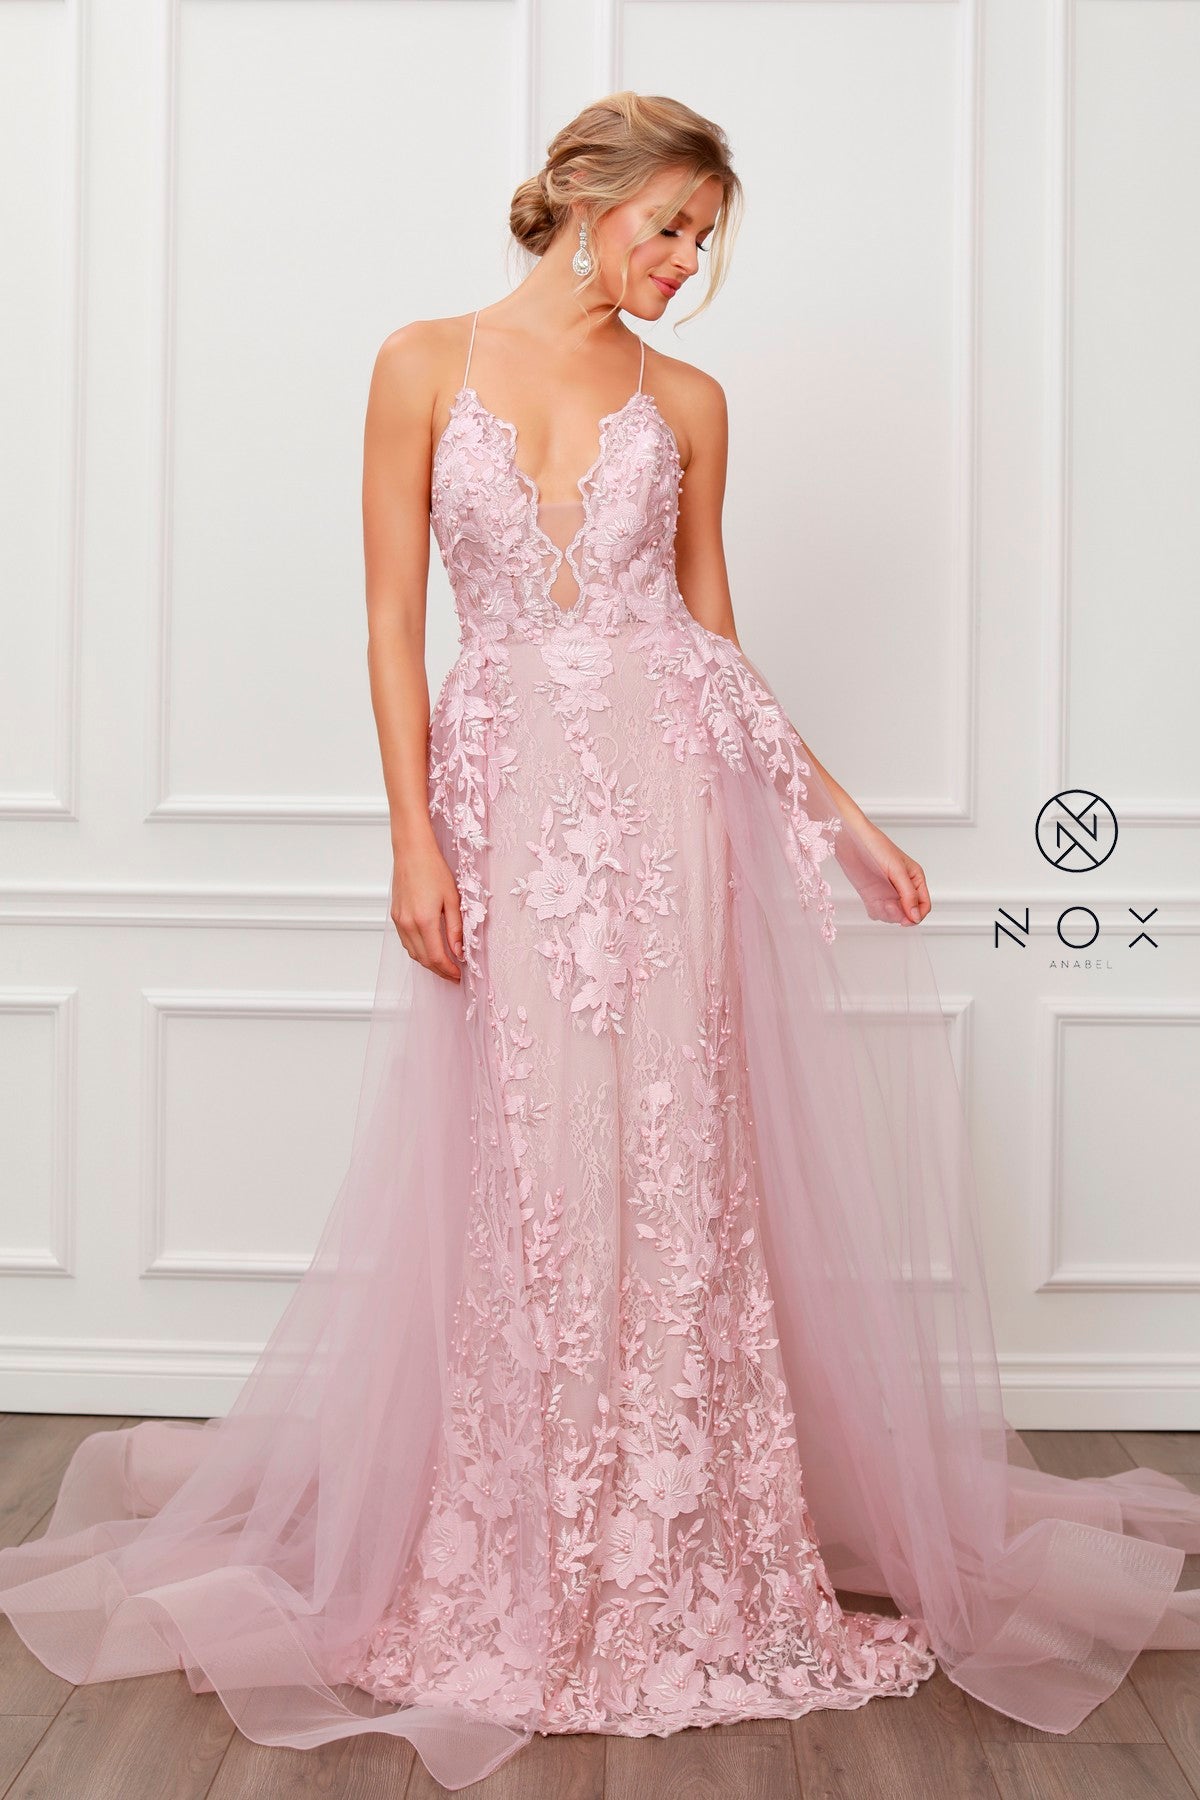 Lace Applique Fitted Overskirt Gown By Nox Anabel -F485